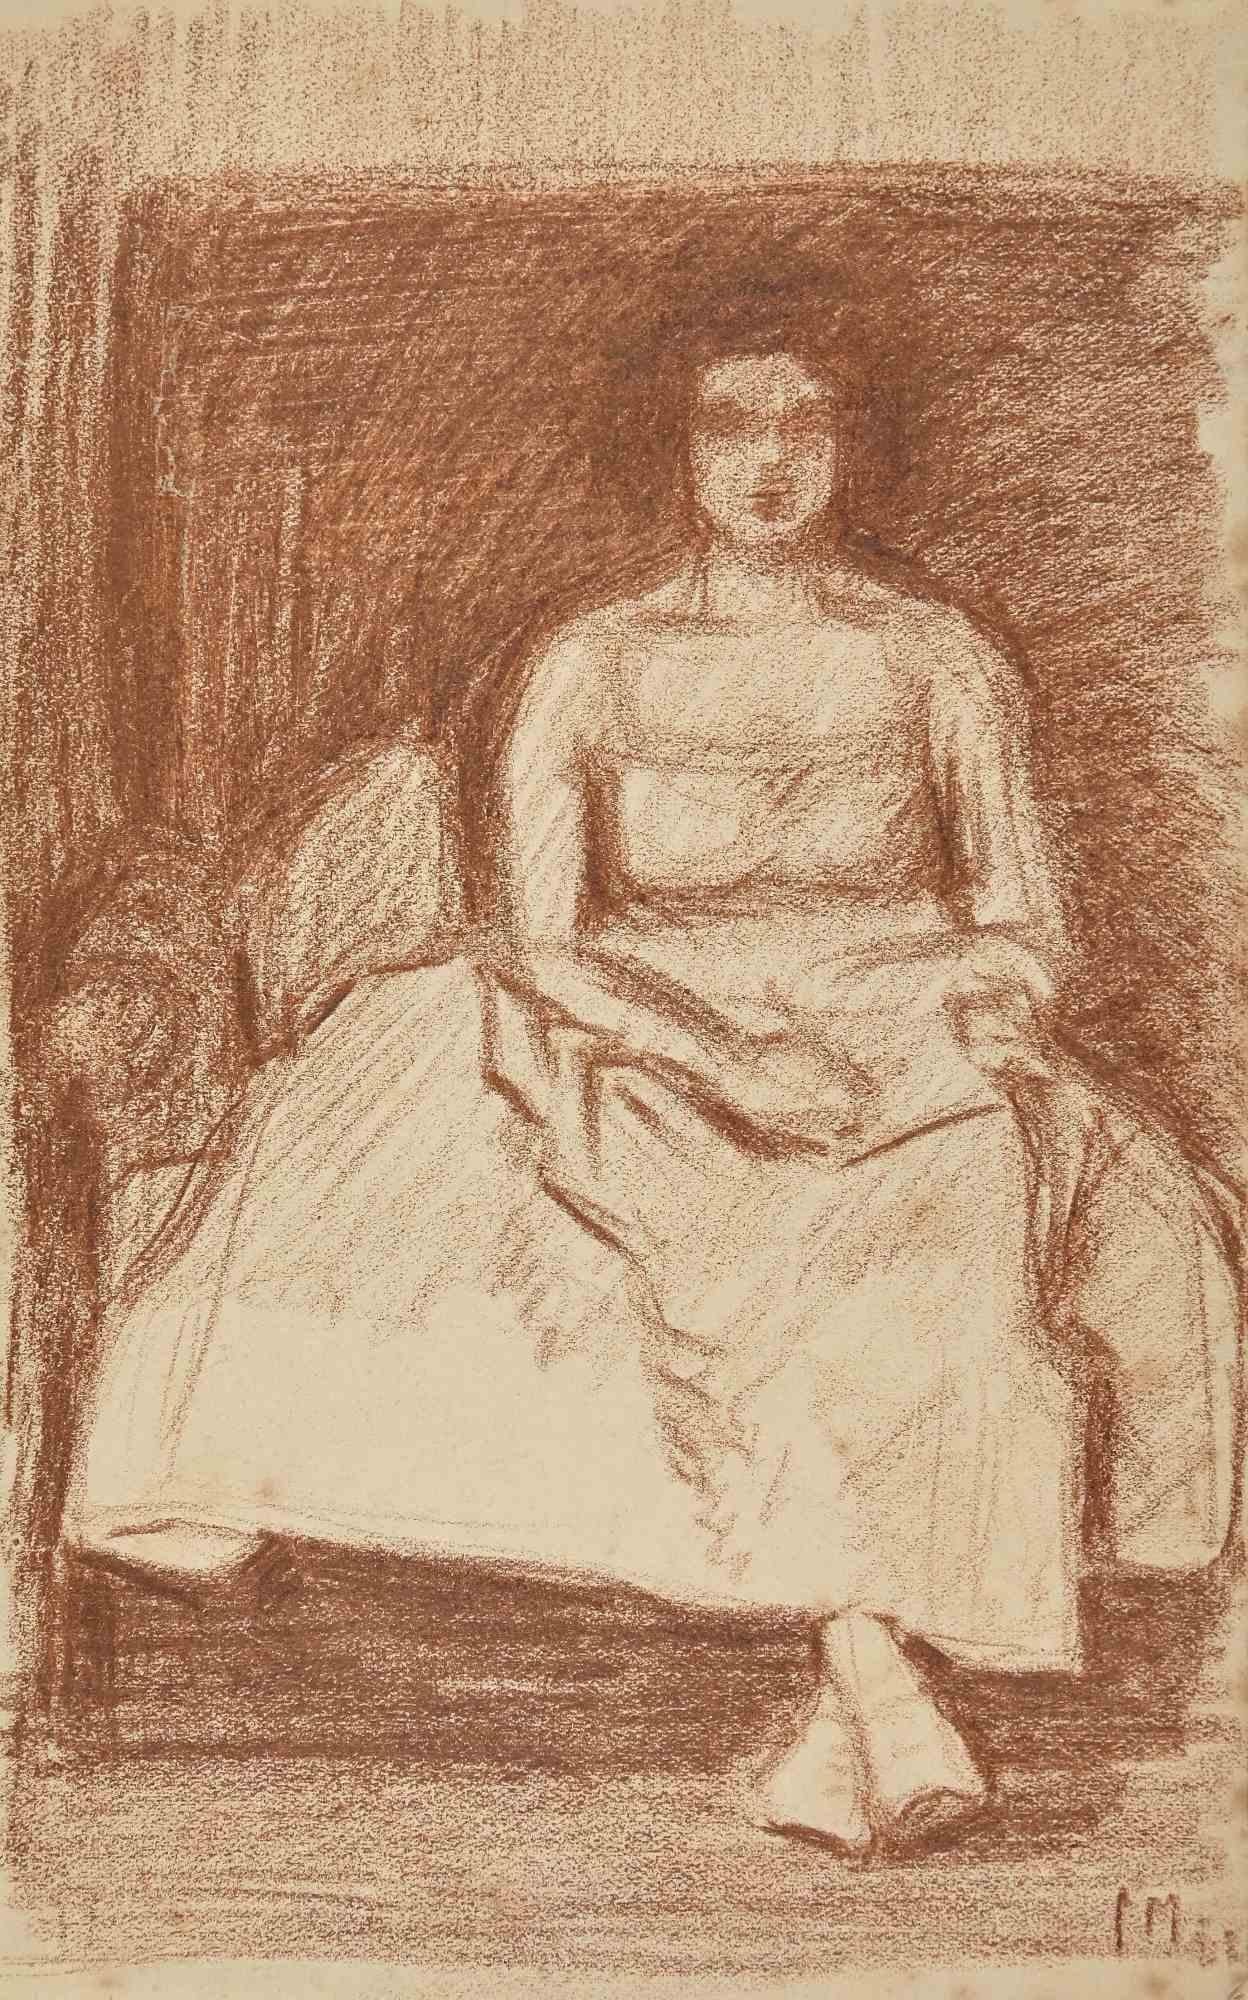 The Seated Woman - Original Drawing - Early 20th Century